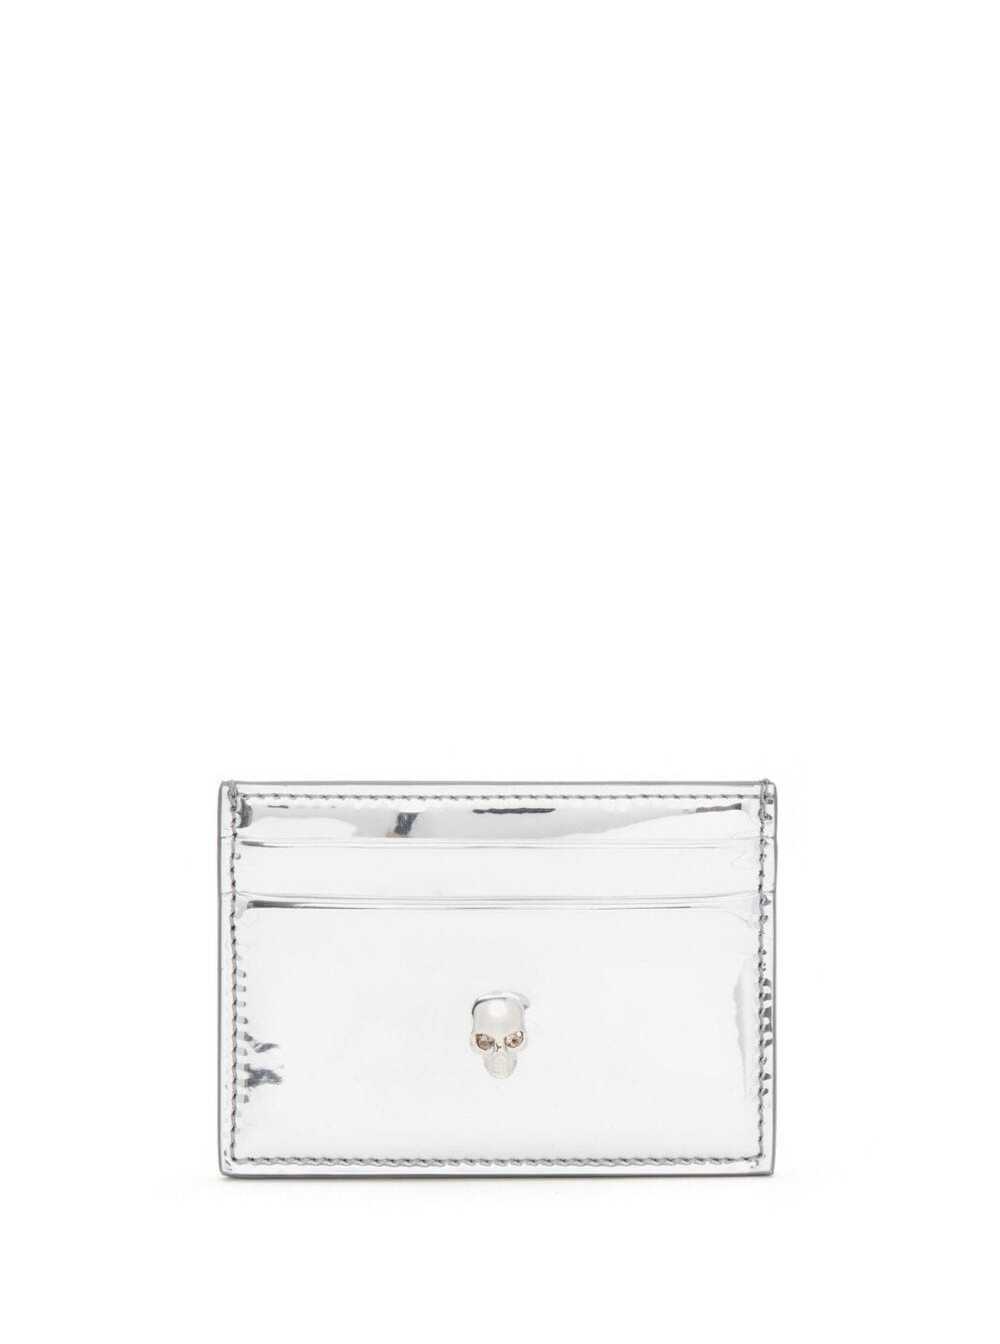 ALEXANDER MCQUEEN SILVER-COLORED CARD-HOLDER WITH SKULL DETAIL IN LAMINATED FAUX LEATHER WOMAN